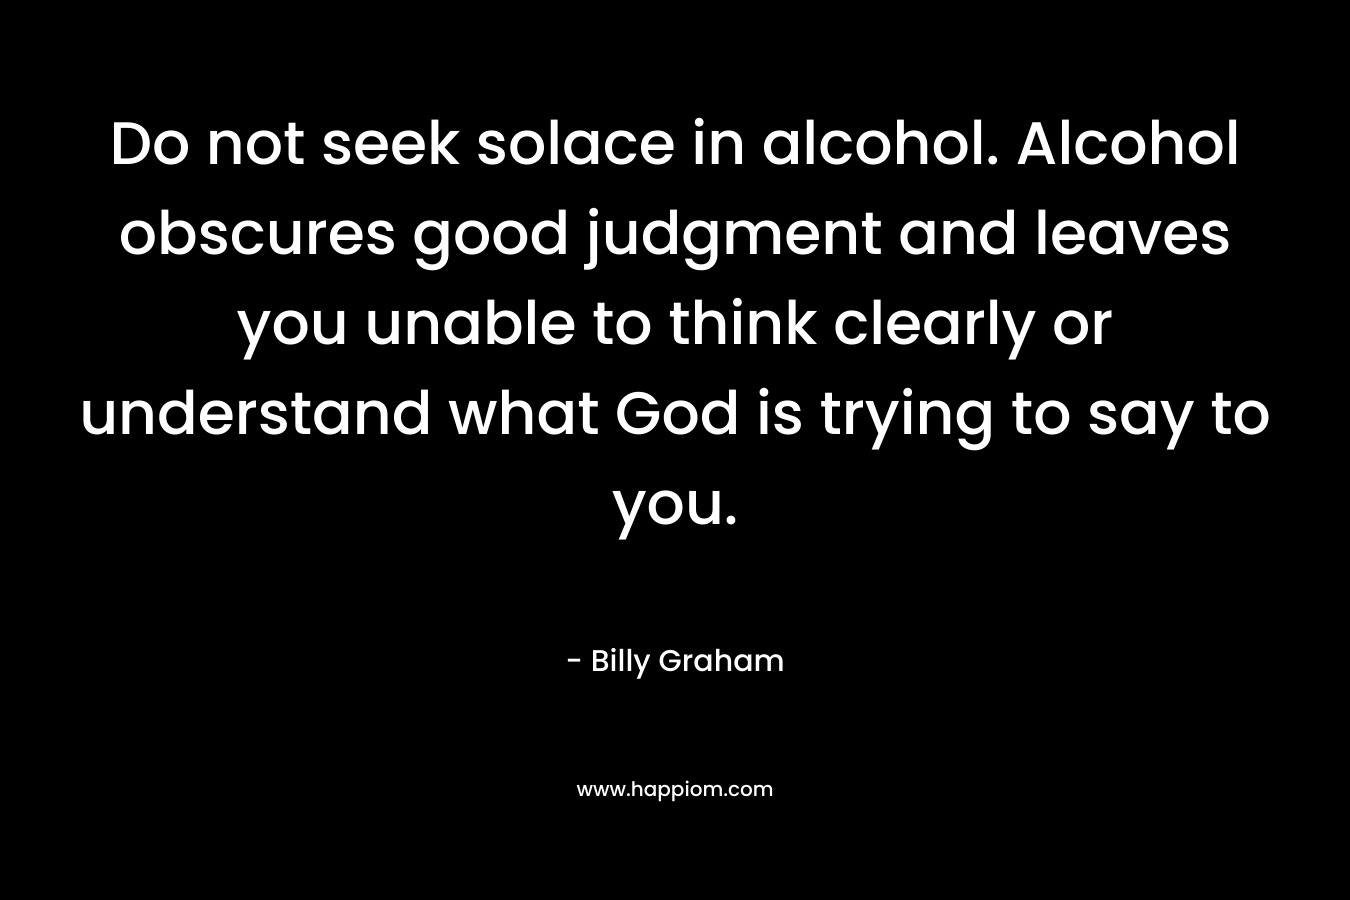 Do not seek solace in alcohol. Alcohol obscures good judgment and leaves you unable to think clearly or understand what God is trying to say to you. – Billy Graham